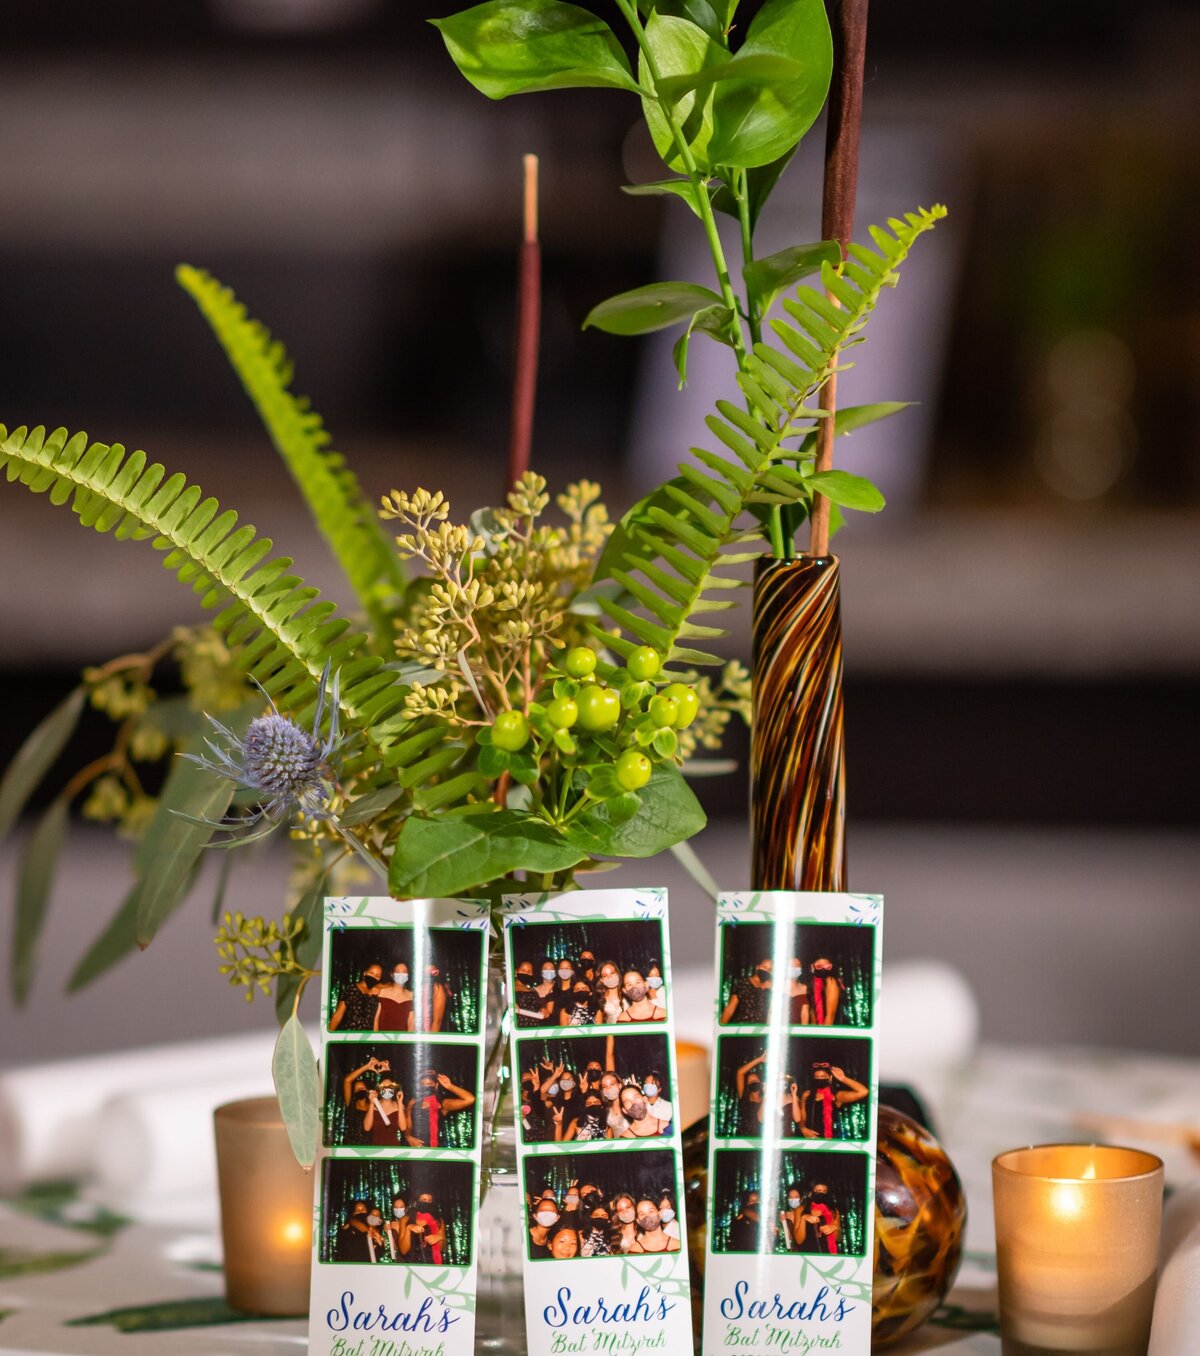 Event-Planning-DC-Bat-Mitzvah-Plant-Greenery-Centerpiece-Tower-Club-Tyssons-Cyndi-Lee-Photography-